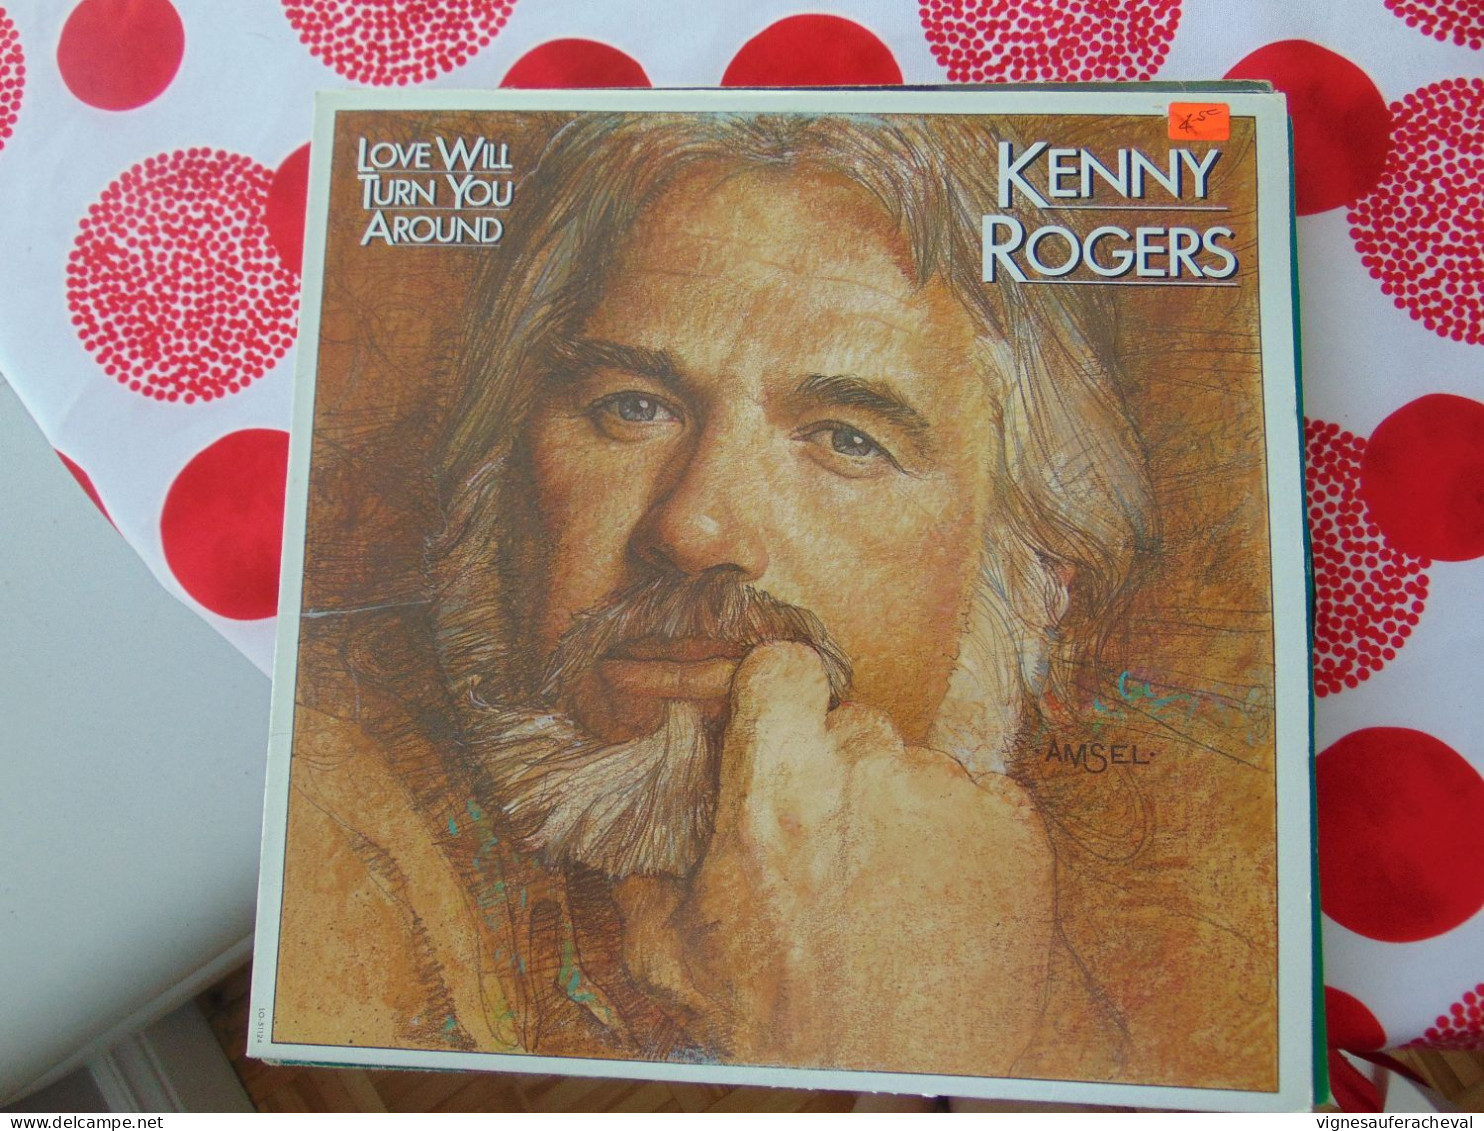 Kenny Rogers- Love Will Turn You Around - Country & Folk